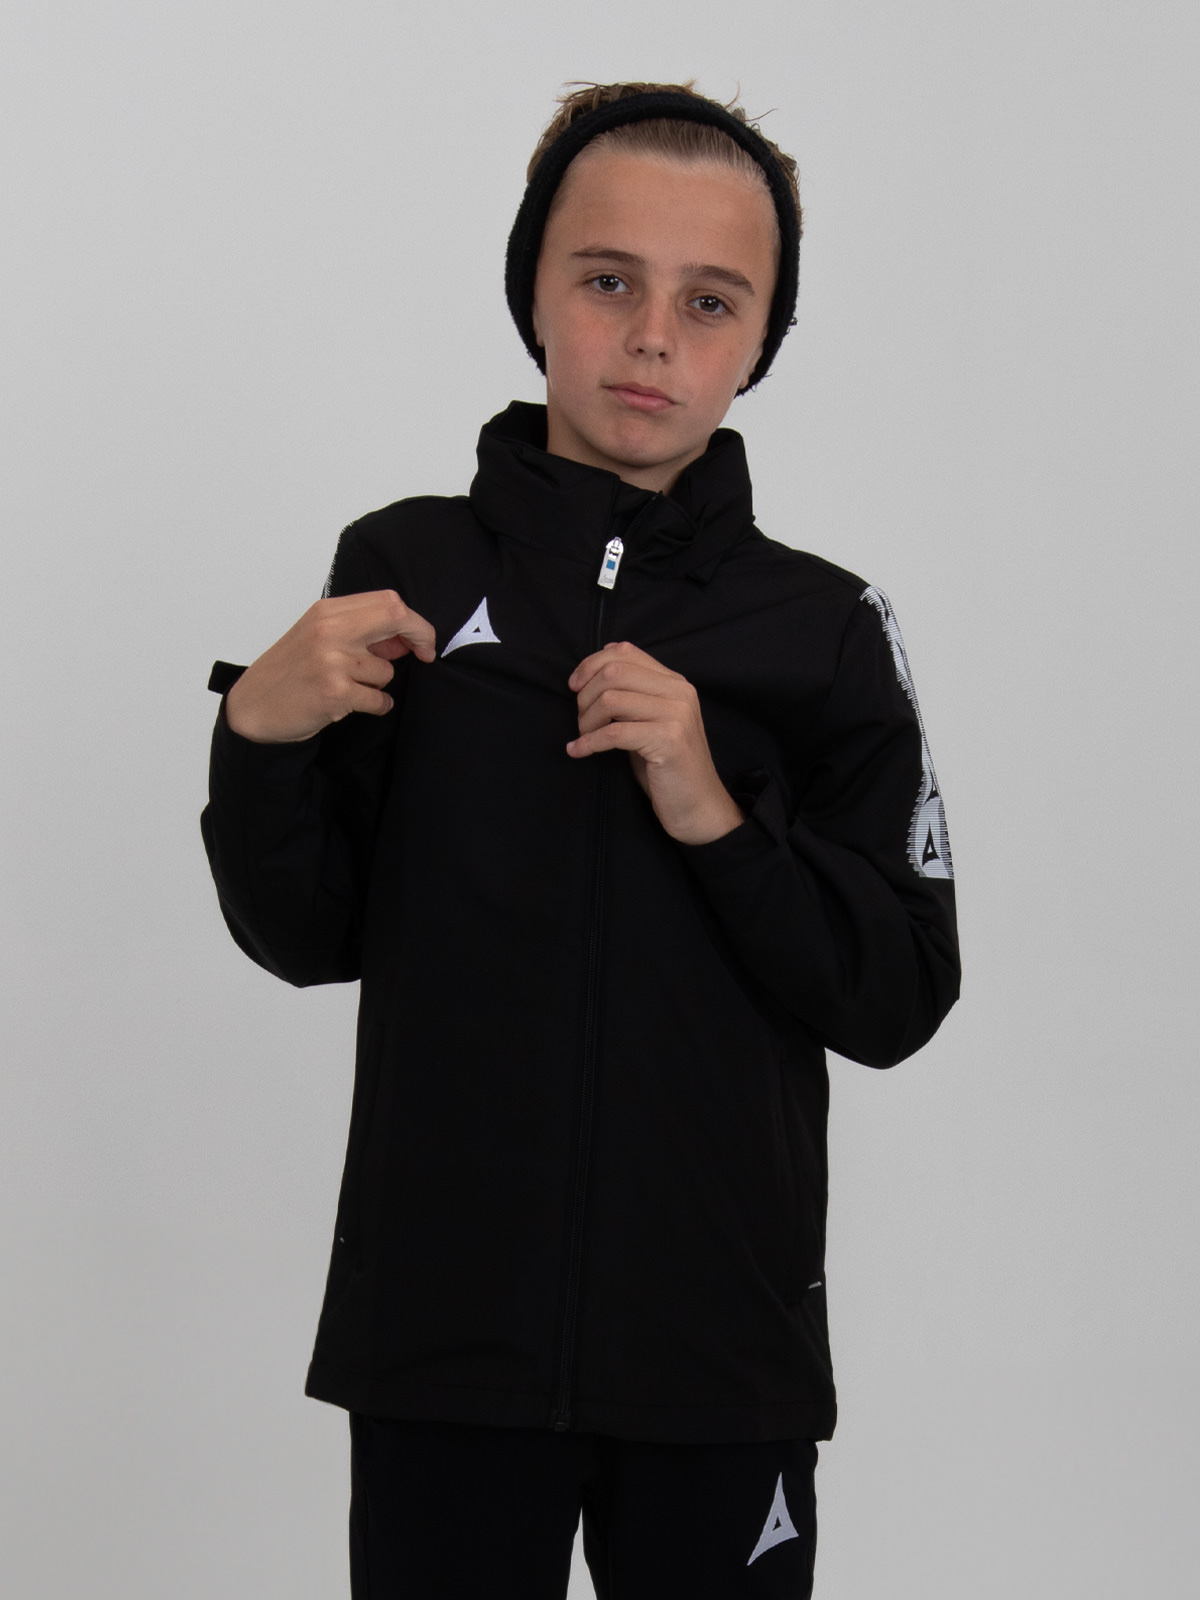 this rain repellent black rain jacket for children is modelled by a young child.